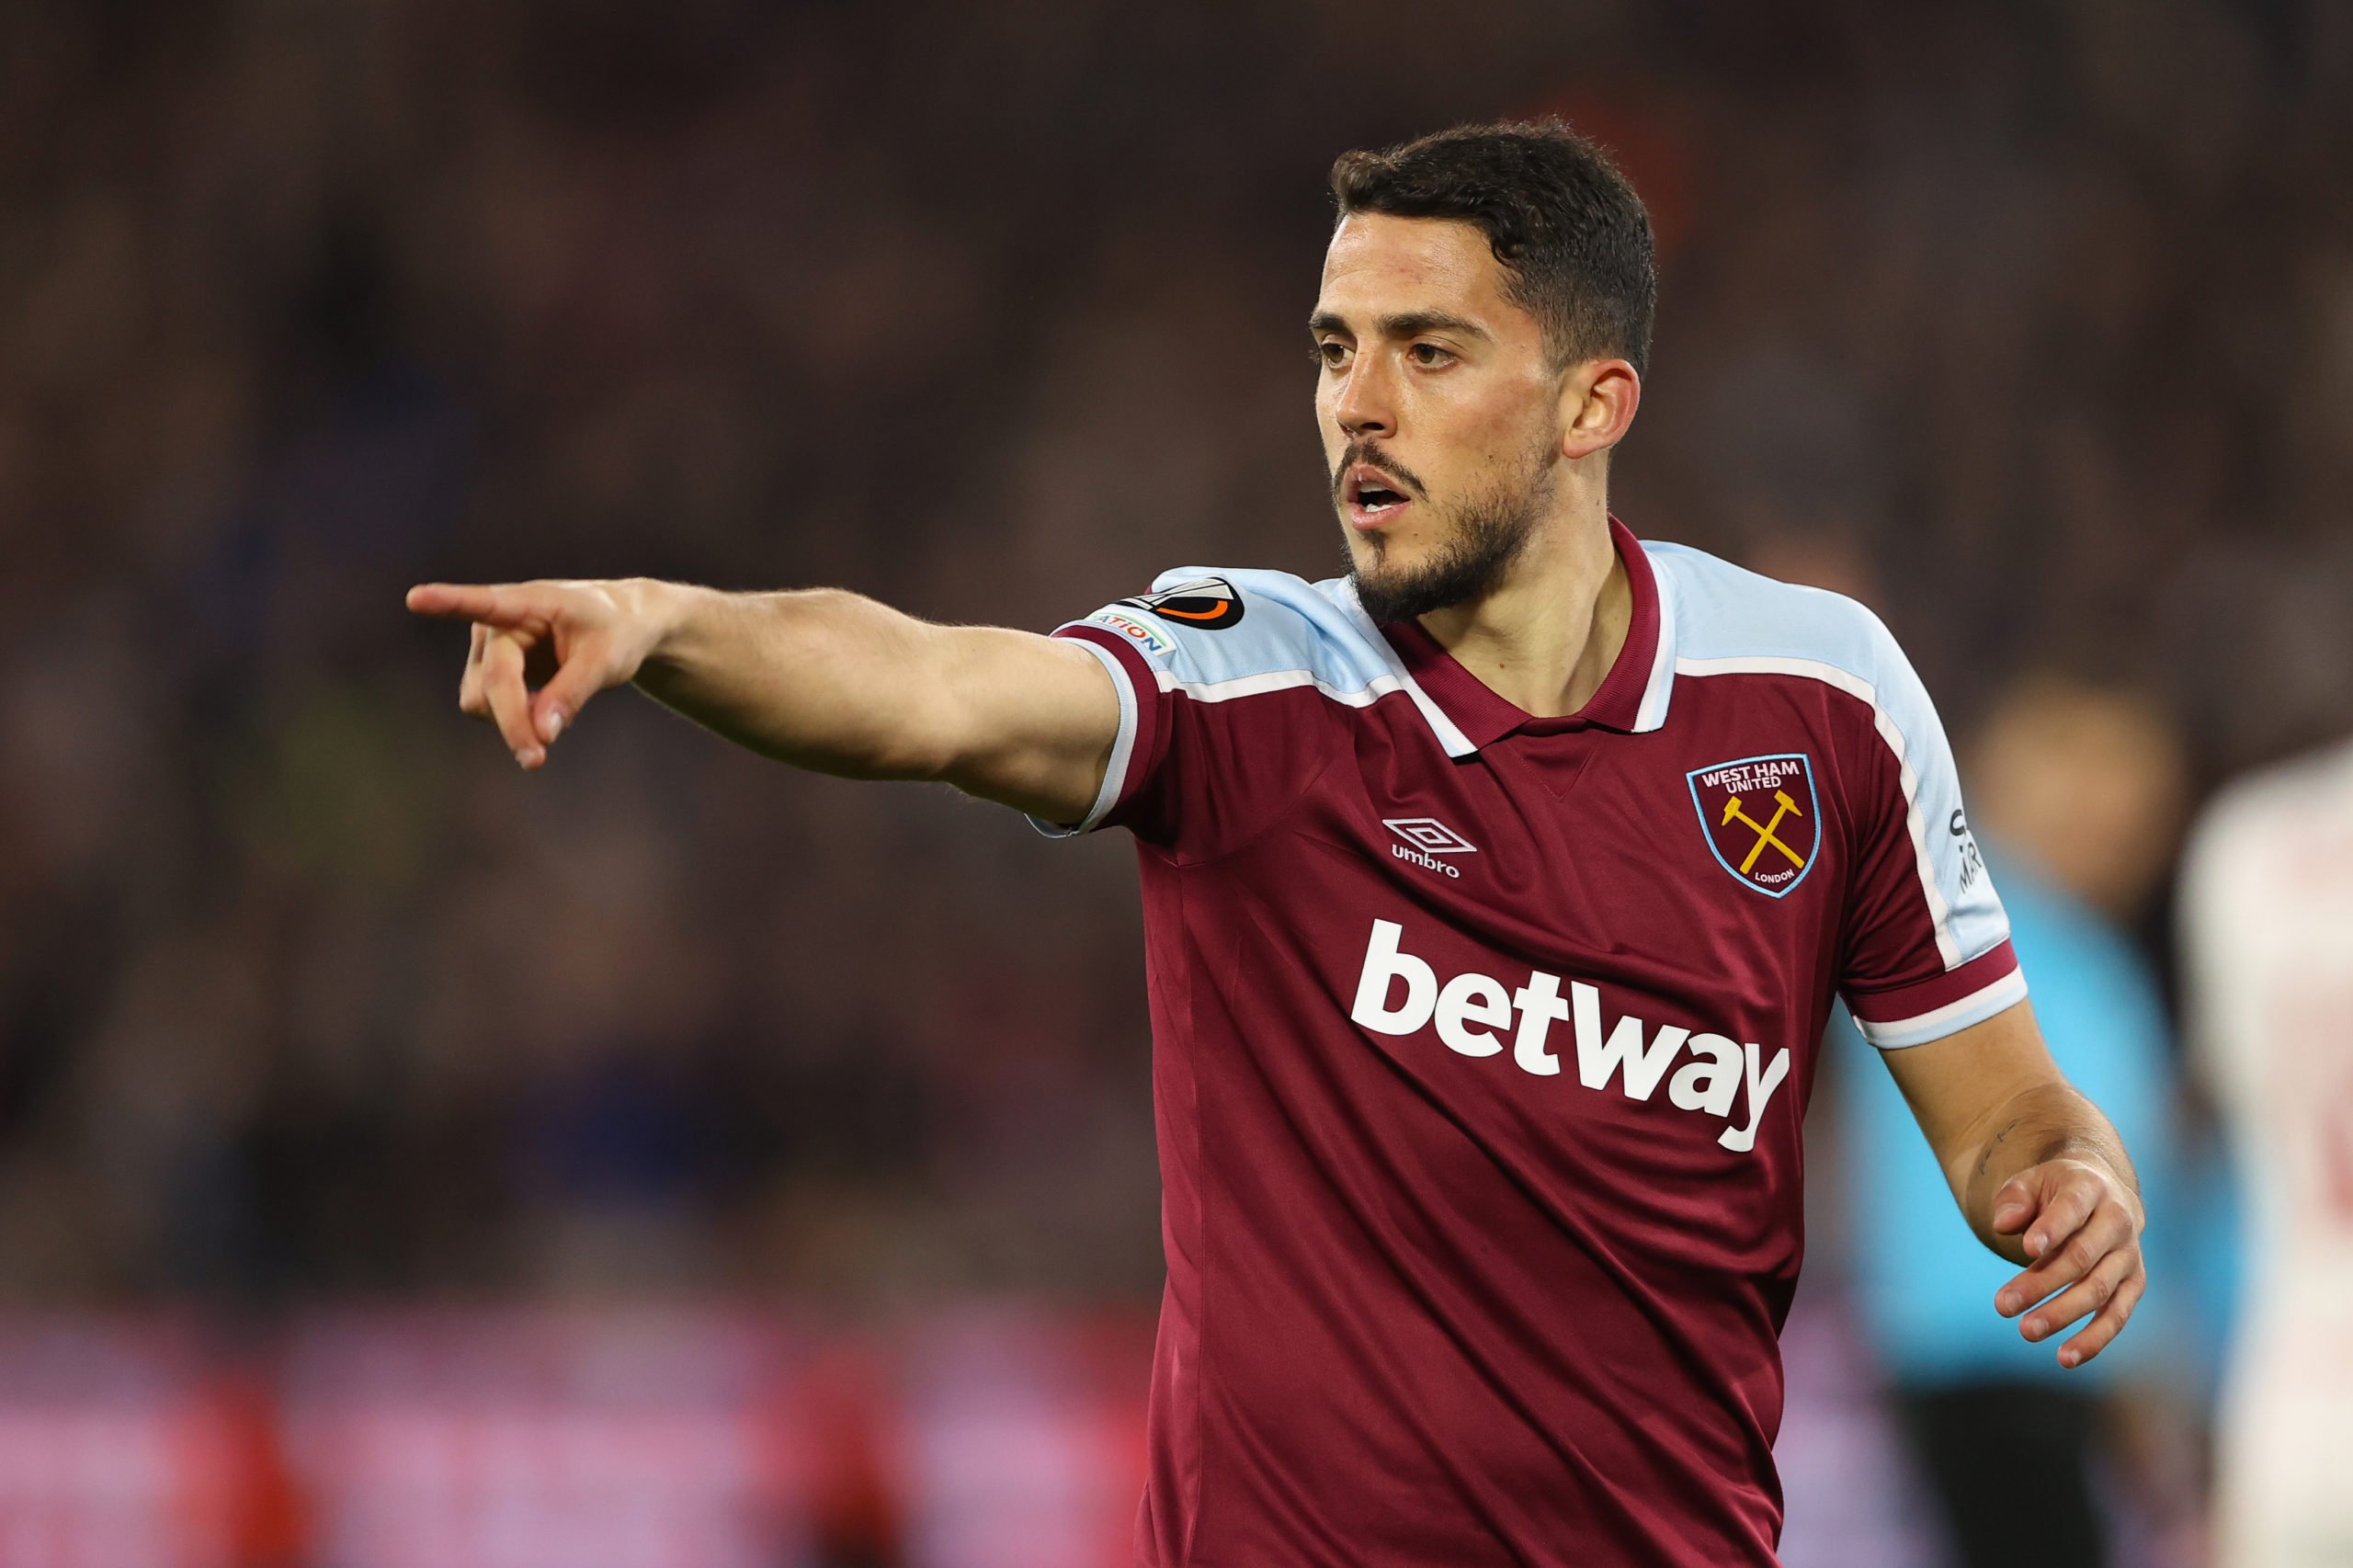 'Shocking' Pablo Fornals lifts the lid on what Sevilla players said to him about West Ham